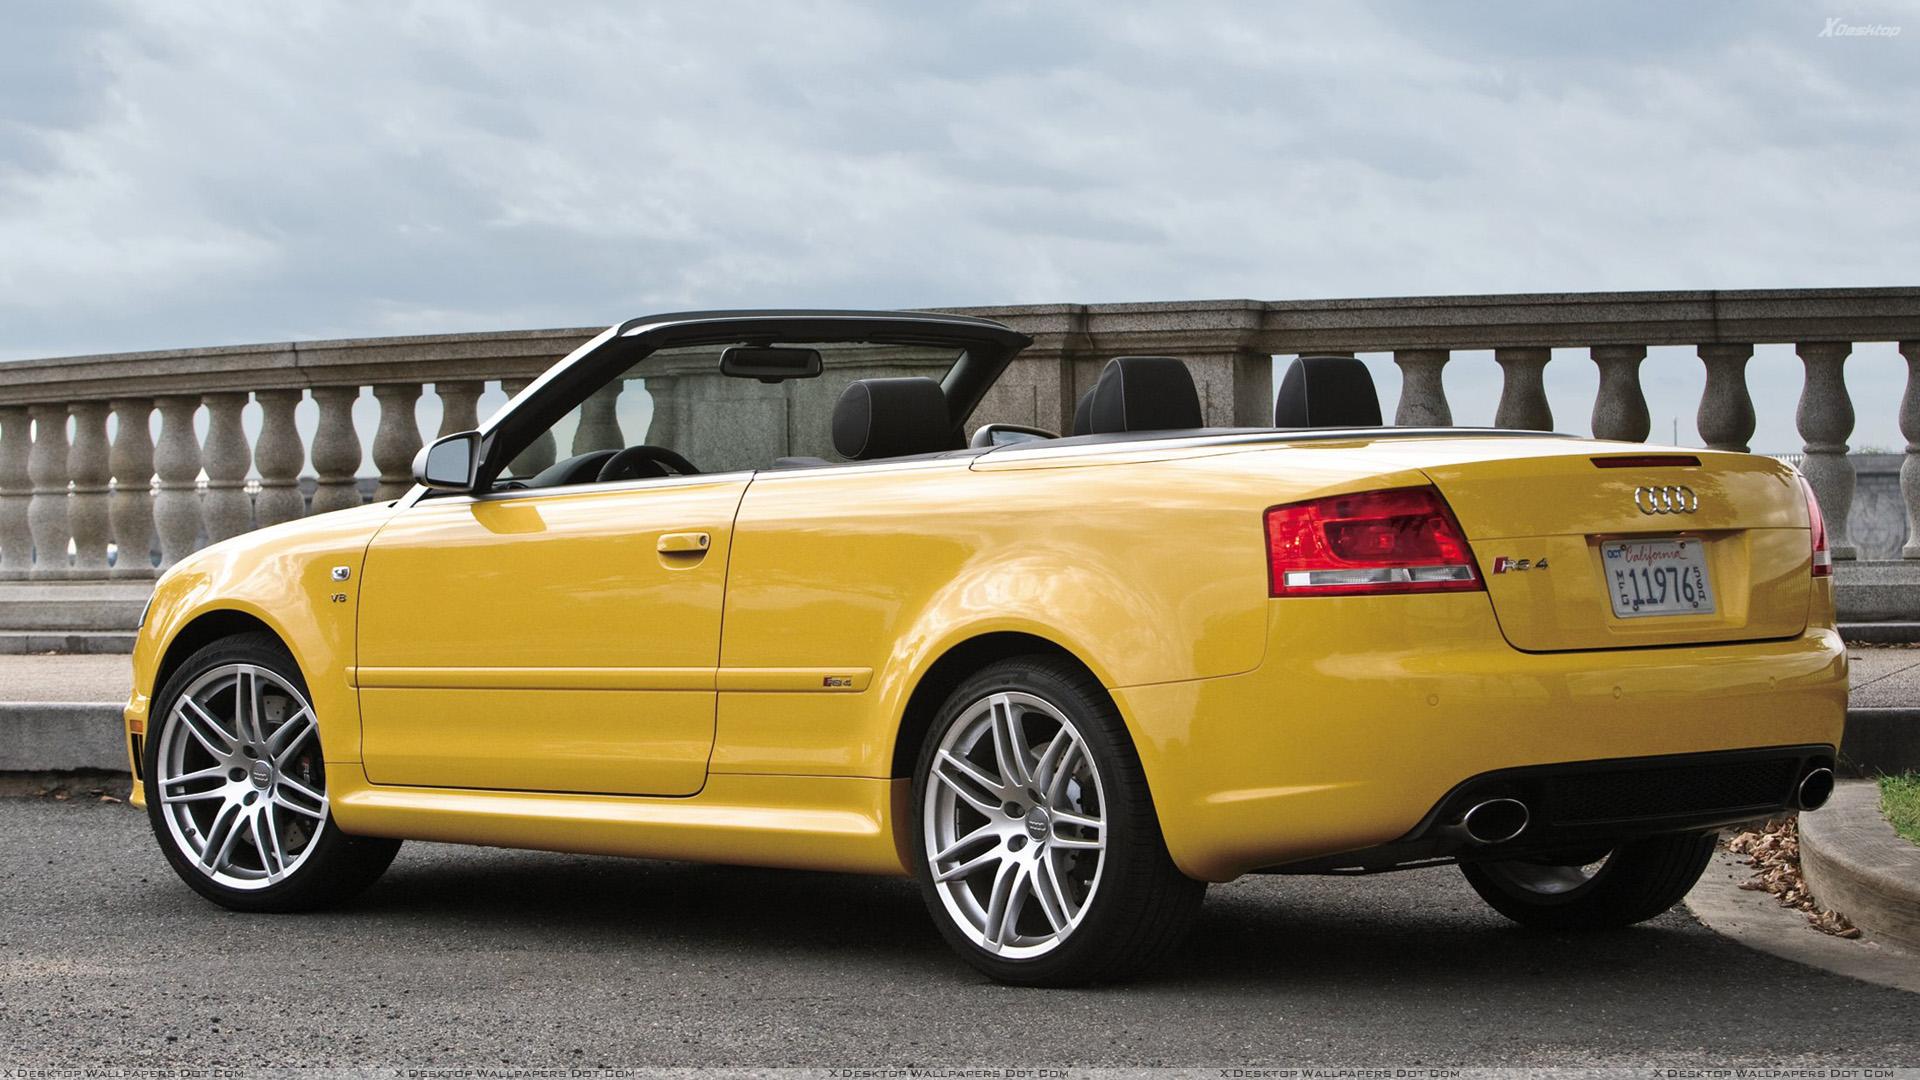 Audi Rs4 Cabriolet Wallpapers